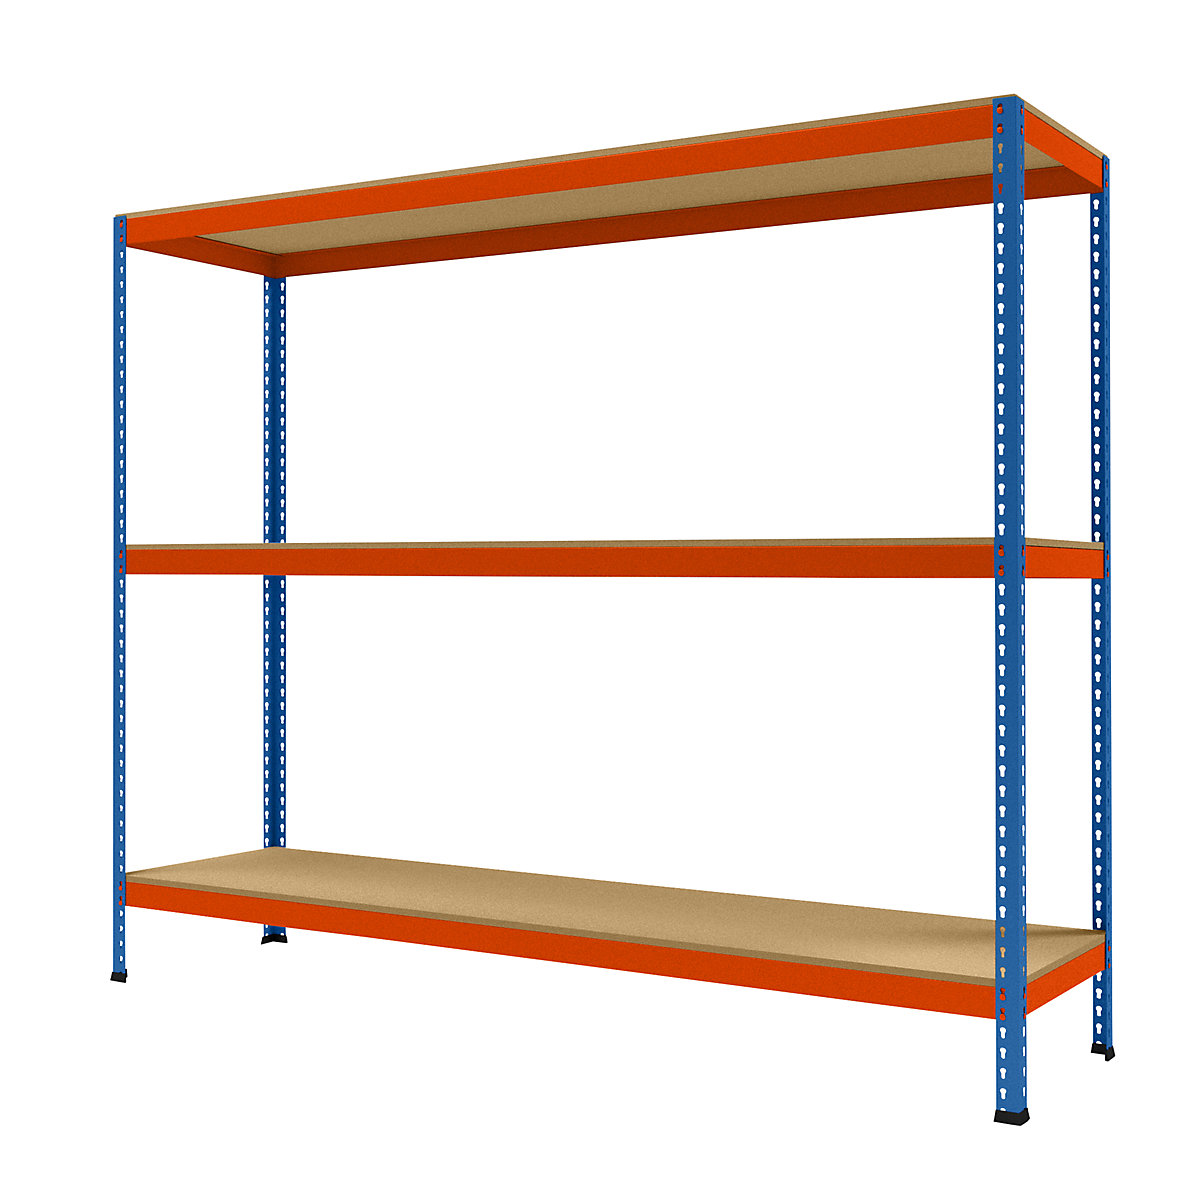 Wide span heavy duty shelving, height 1981 mm, overall depth 621 mm, width 2450 mm-2